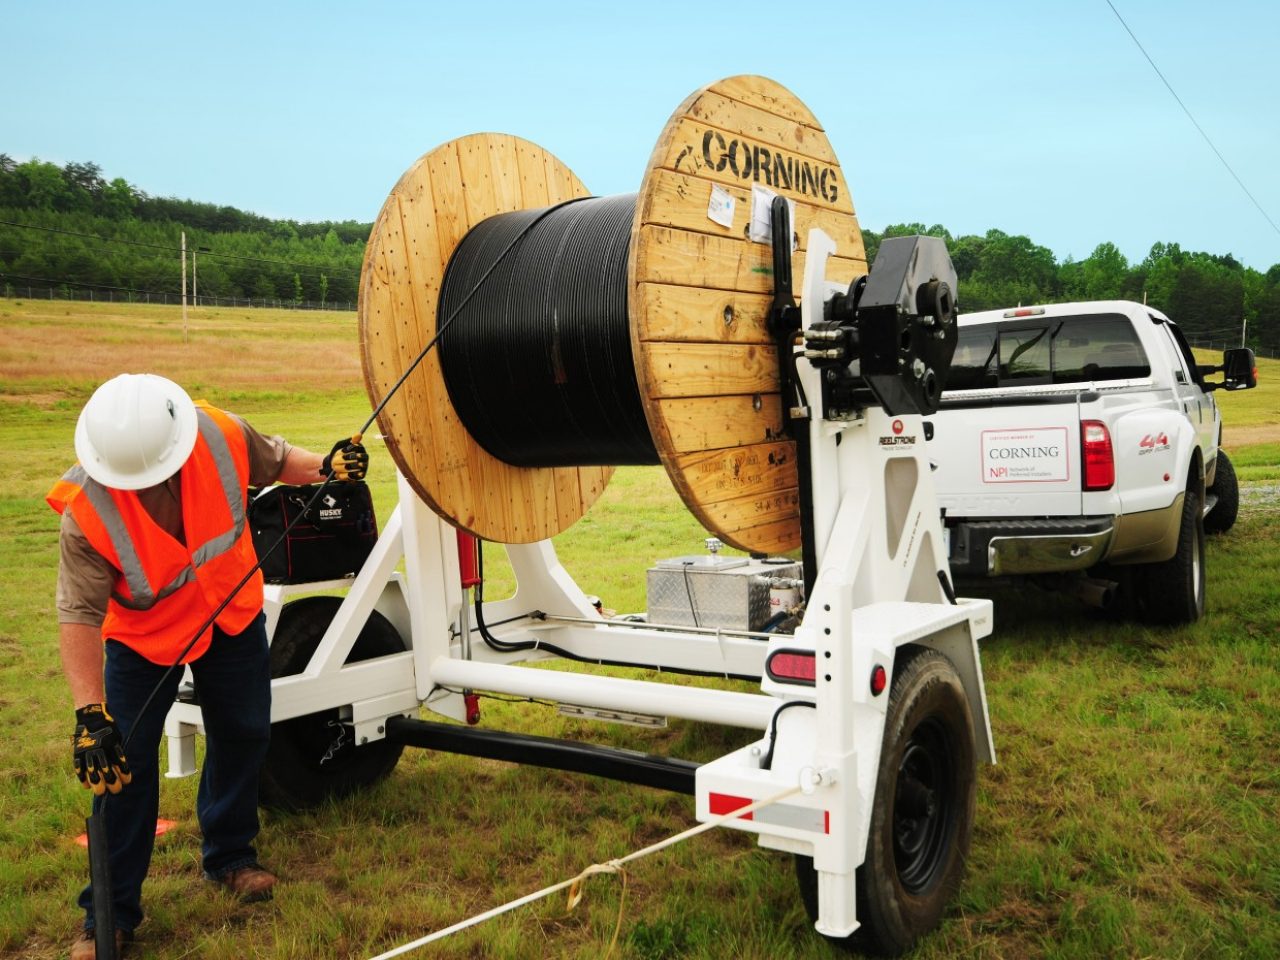 Engineer in high viz vest guiding Corning fiber cable from reel in an open field